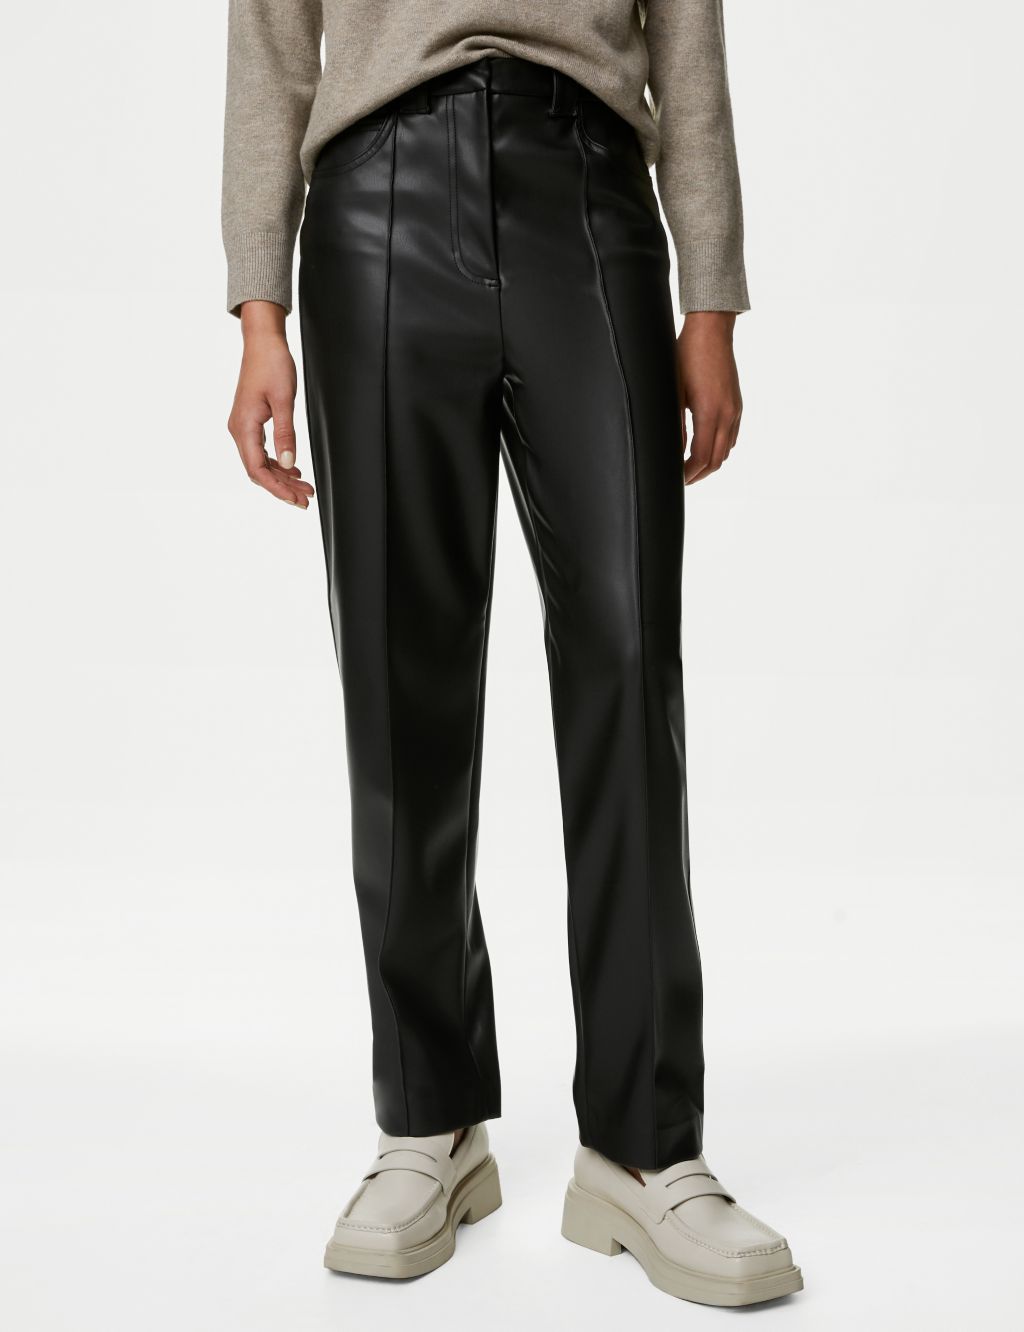 Leather Look Straight Leg Cropped Trousers image 3